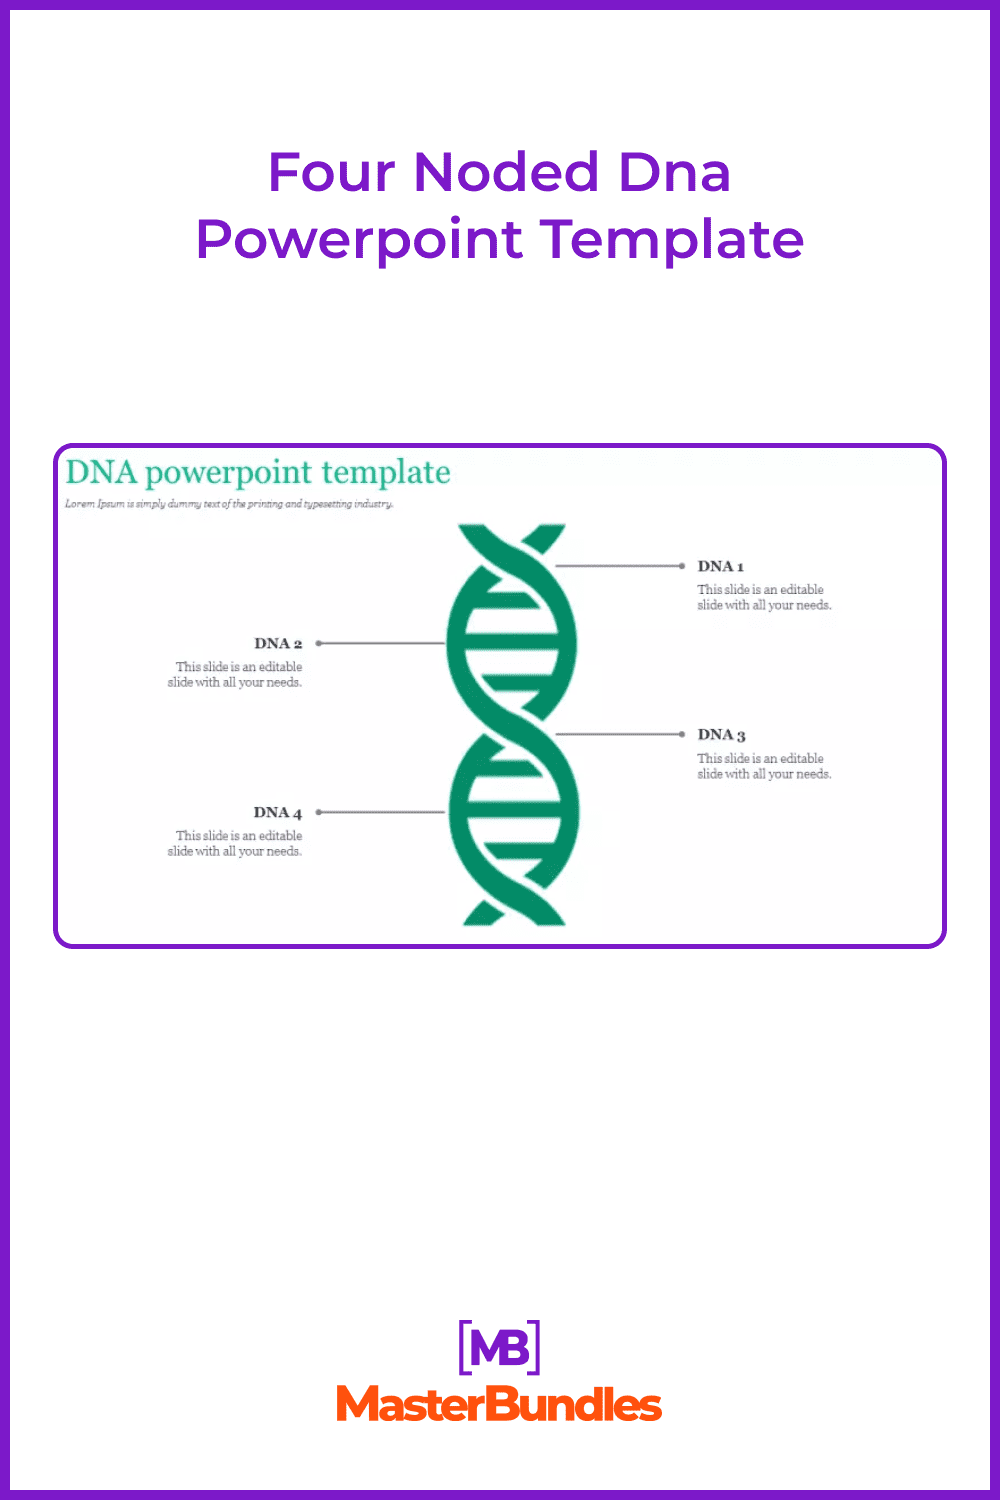 Four noded DNA powerpoint template.